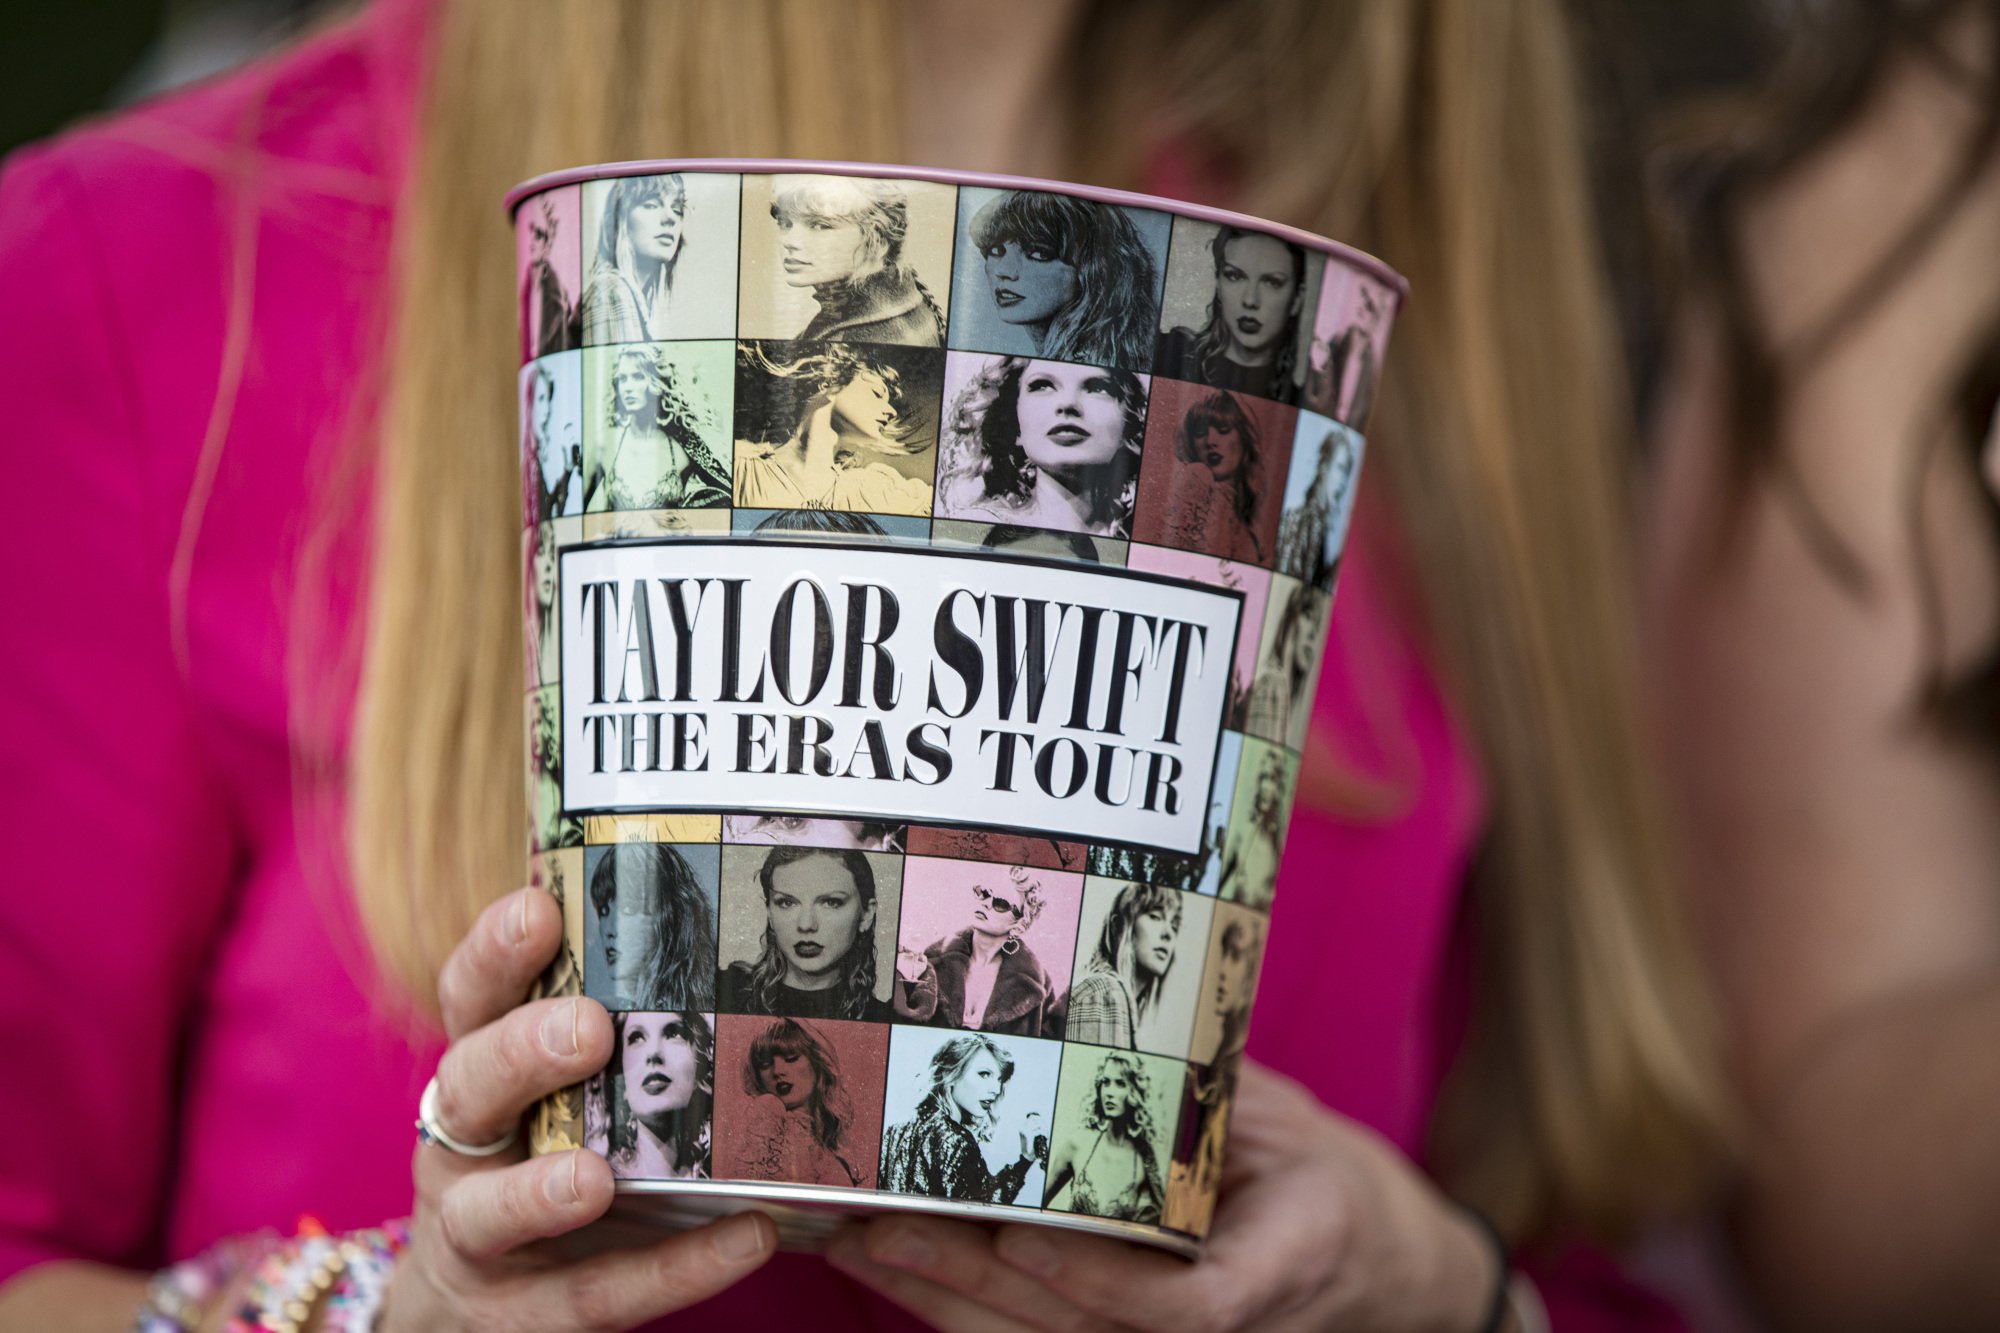 A white woman with blonde hair holds a popcorn bucket that reads, "Taylor Swift The Eras Tour."